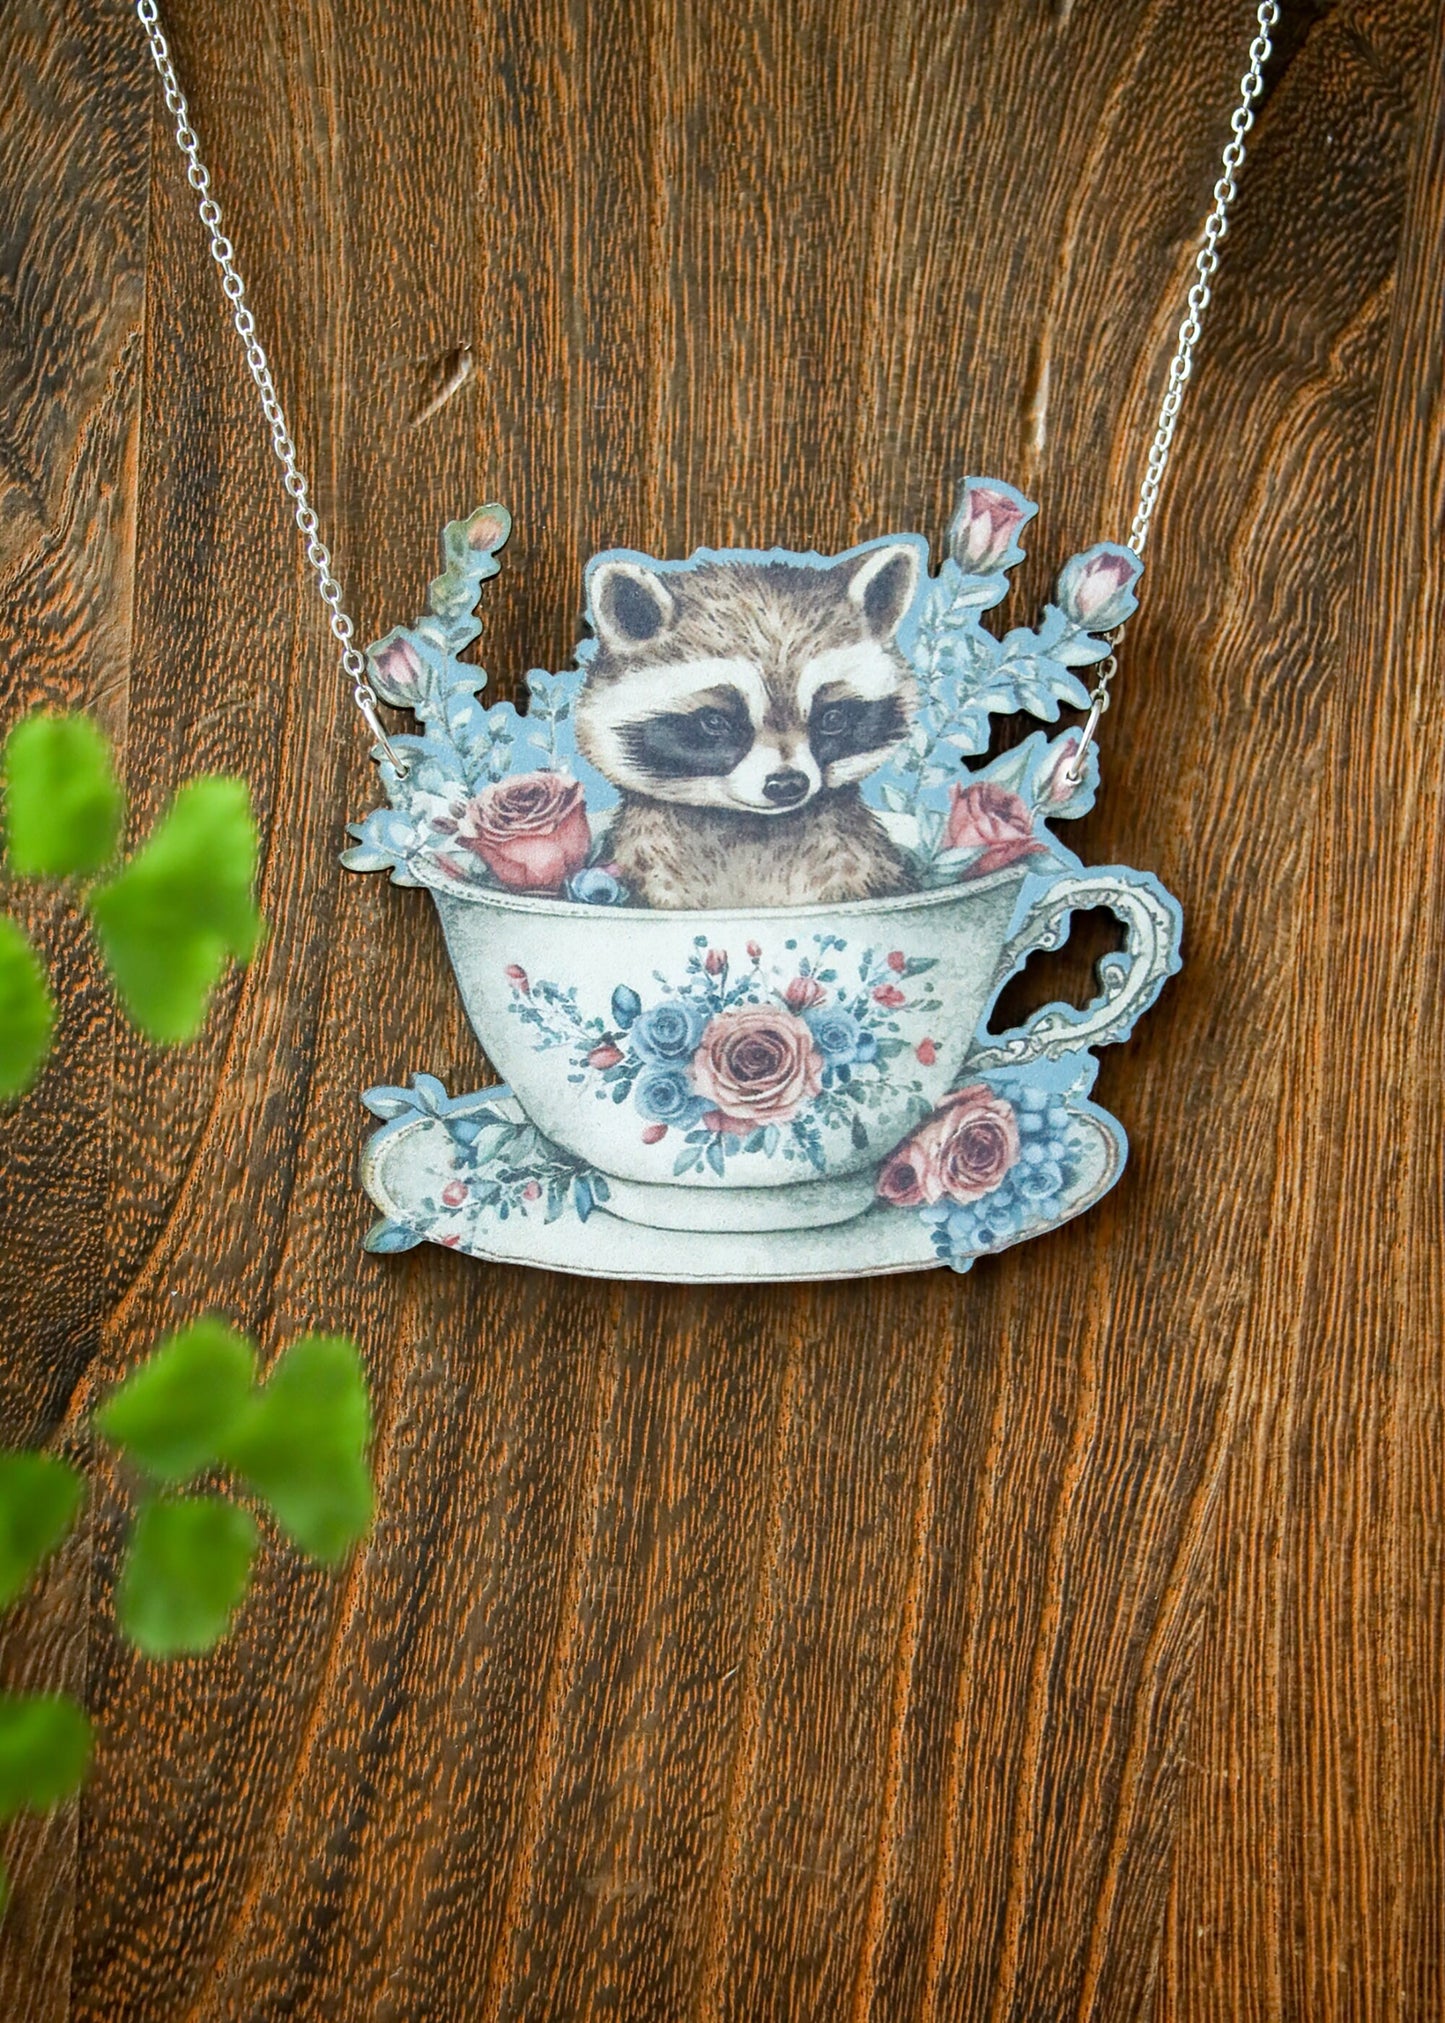 Teacup Critter Pendants | Boho Cottagecore Animal Necklace | Whimsical Fantasy Floral Kawaii Jewelry | Frog Toad Raccoon Tea Time Art